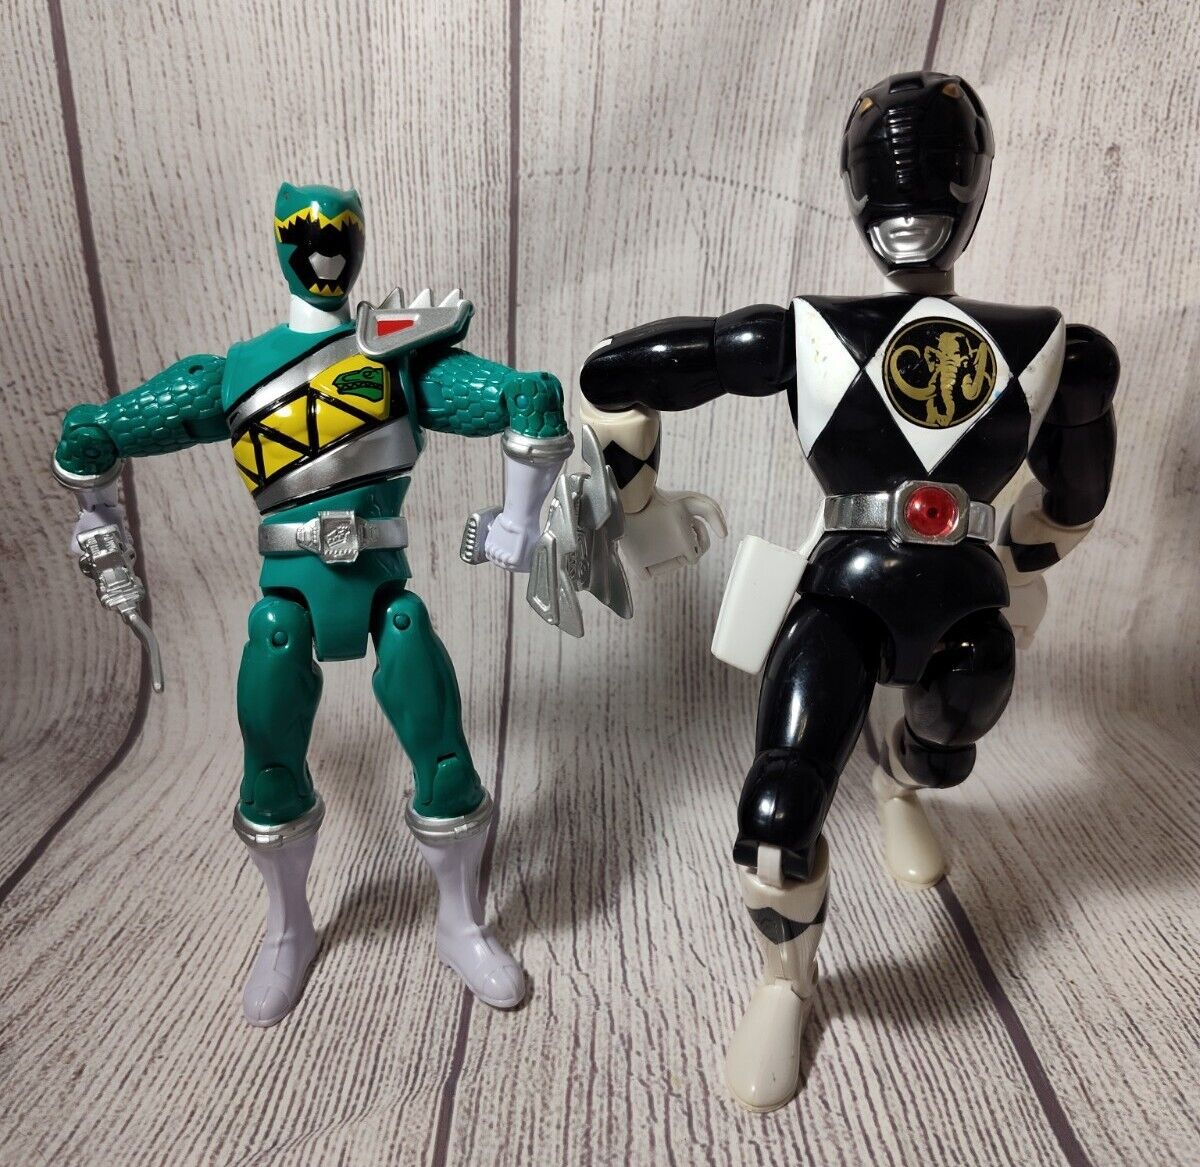 Bandai Mighty Morphin Power Rangers Figures Lot of 2 -Vintage Zach, Dino Charge 